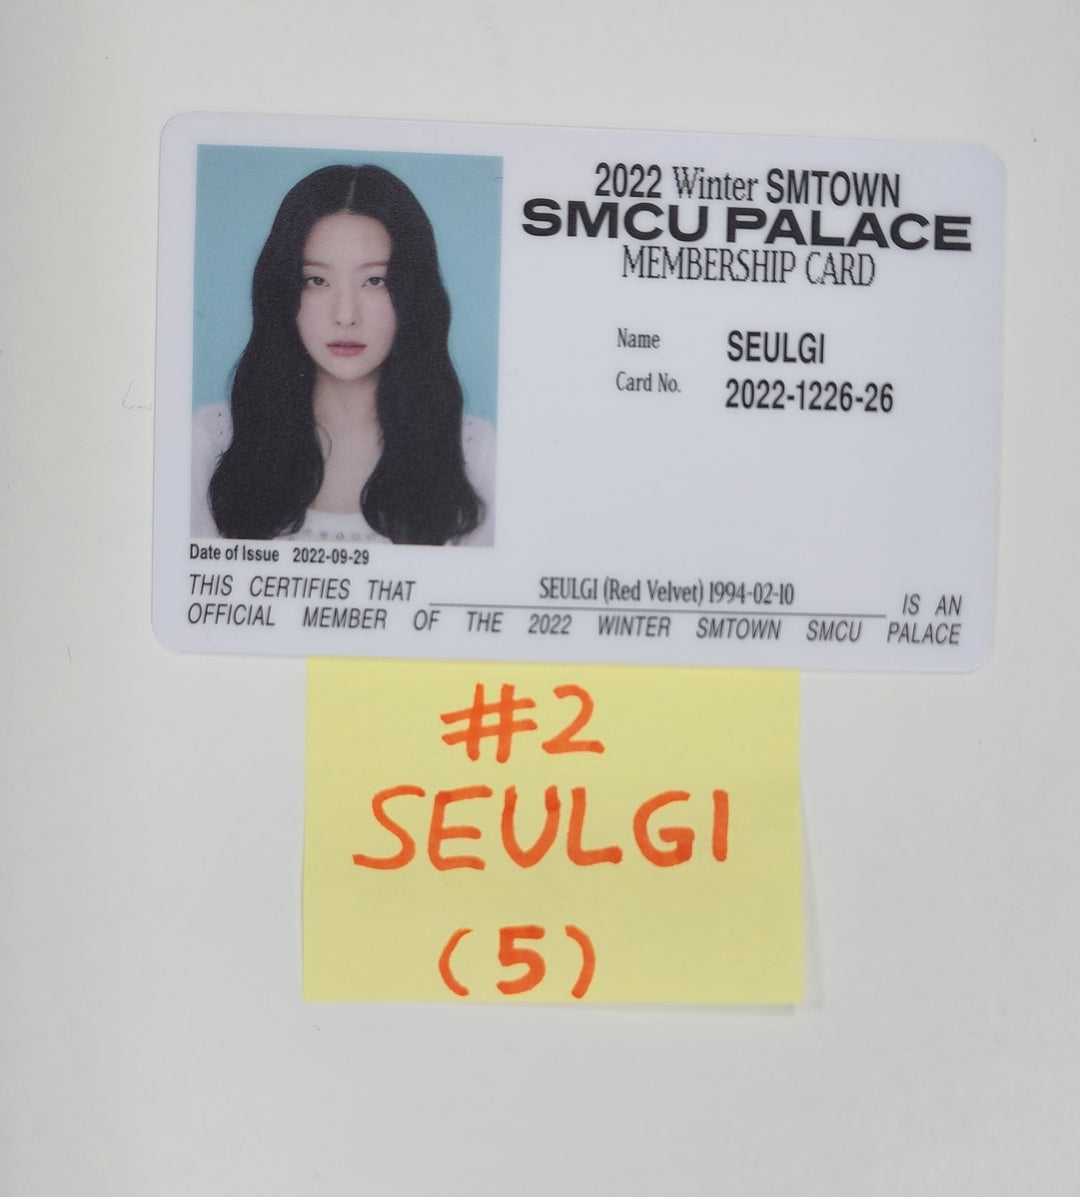  Red Velvet - [2022 Winter SMTOWN : SMCU PALACE] (GUEST. Red  Velvet) Photobook + CD-R + Lyrics Paper + Photo Card + Postcard + Folded  Poster + Poster + 2 Pin Button Badges + 4 Extra Photocards : Red Velvet:  Office Products